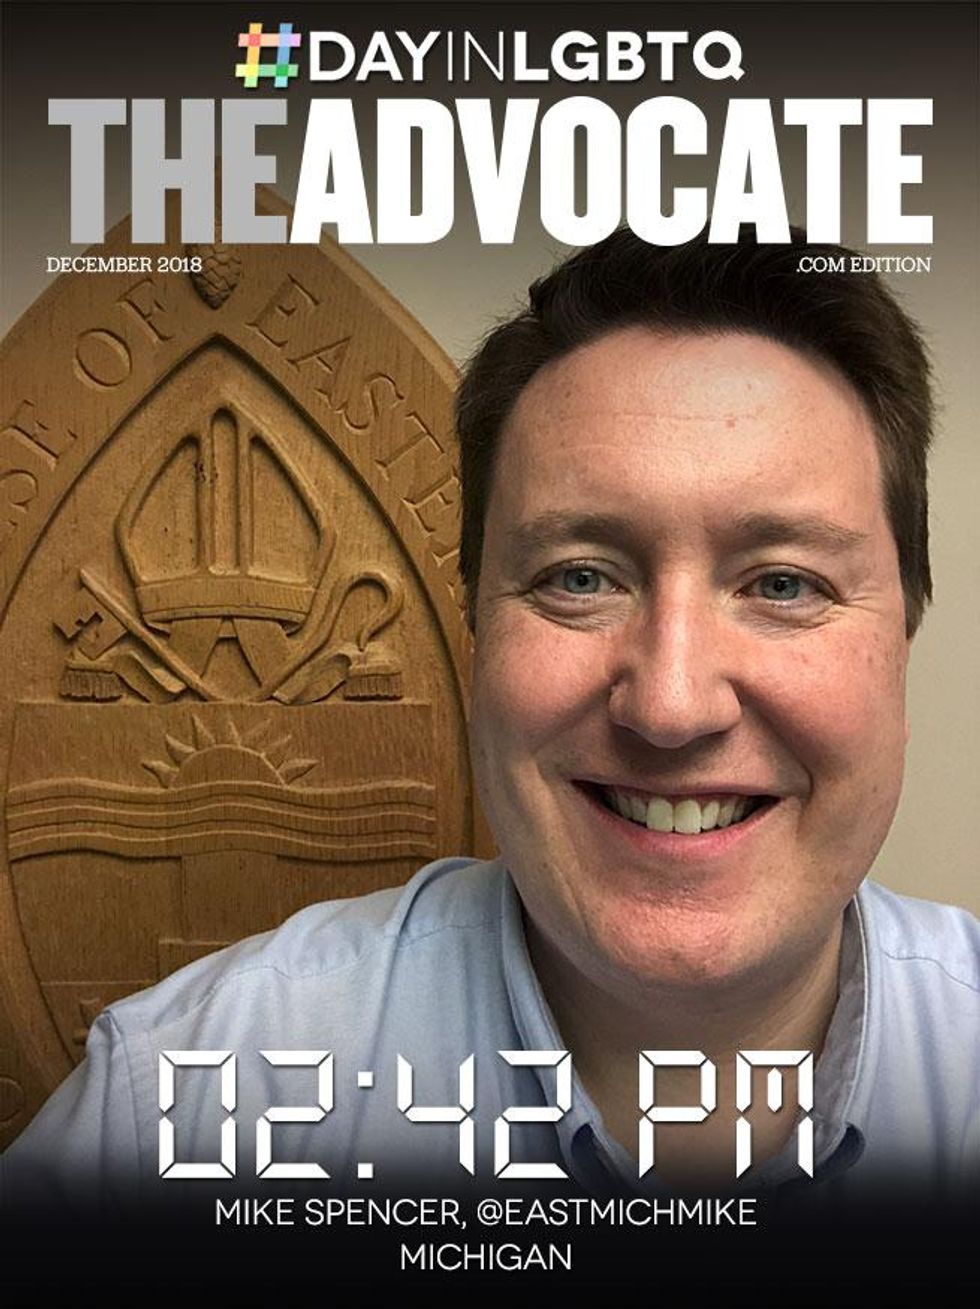 Pm-02-39-spencer-theadvocate-2018-dayinlgbt-cover-template-655